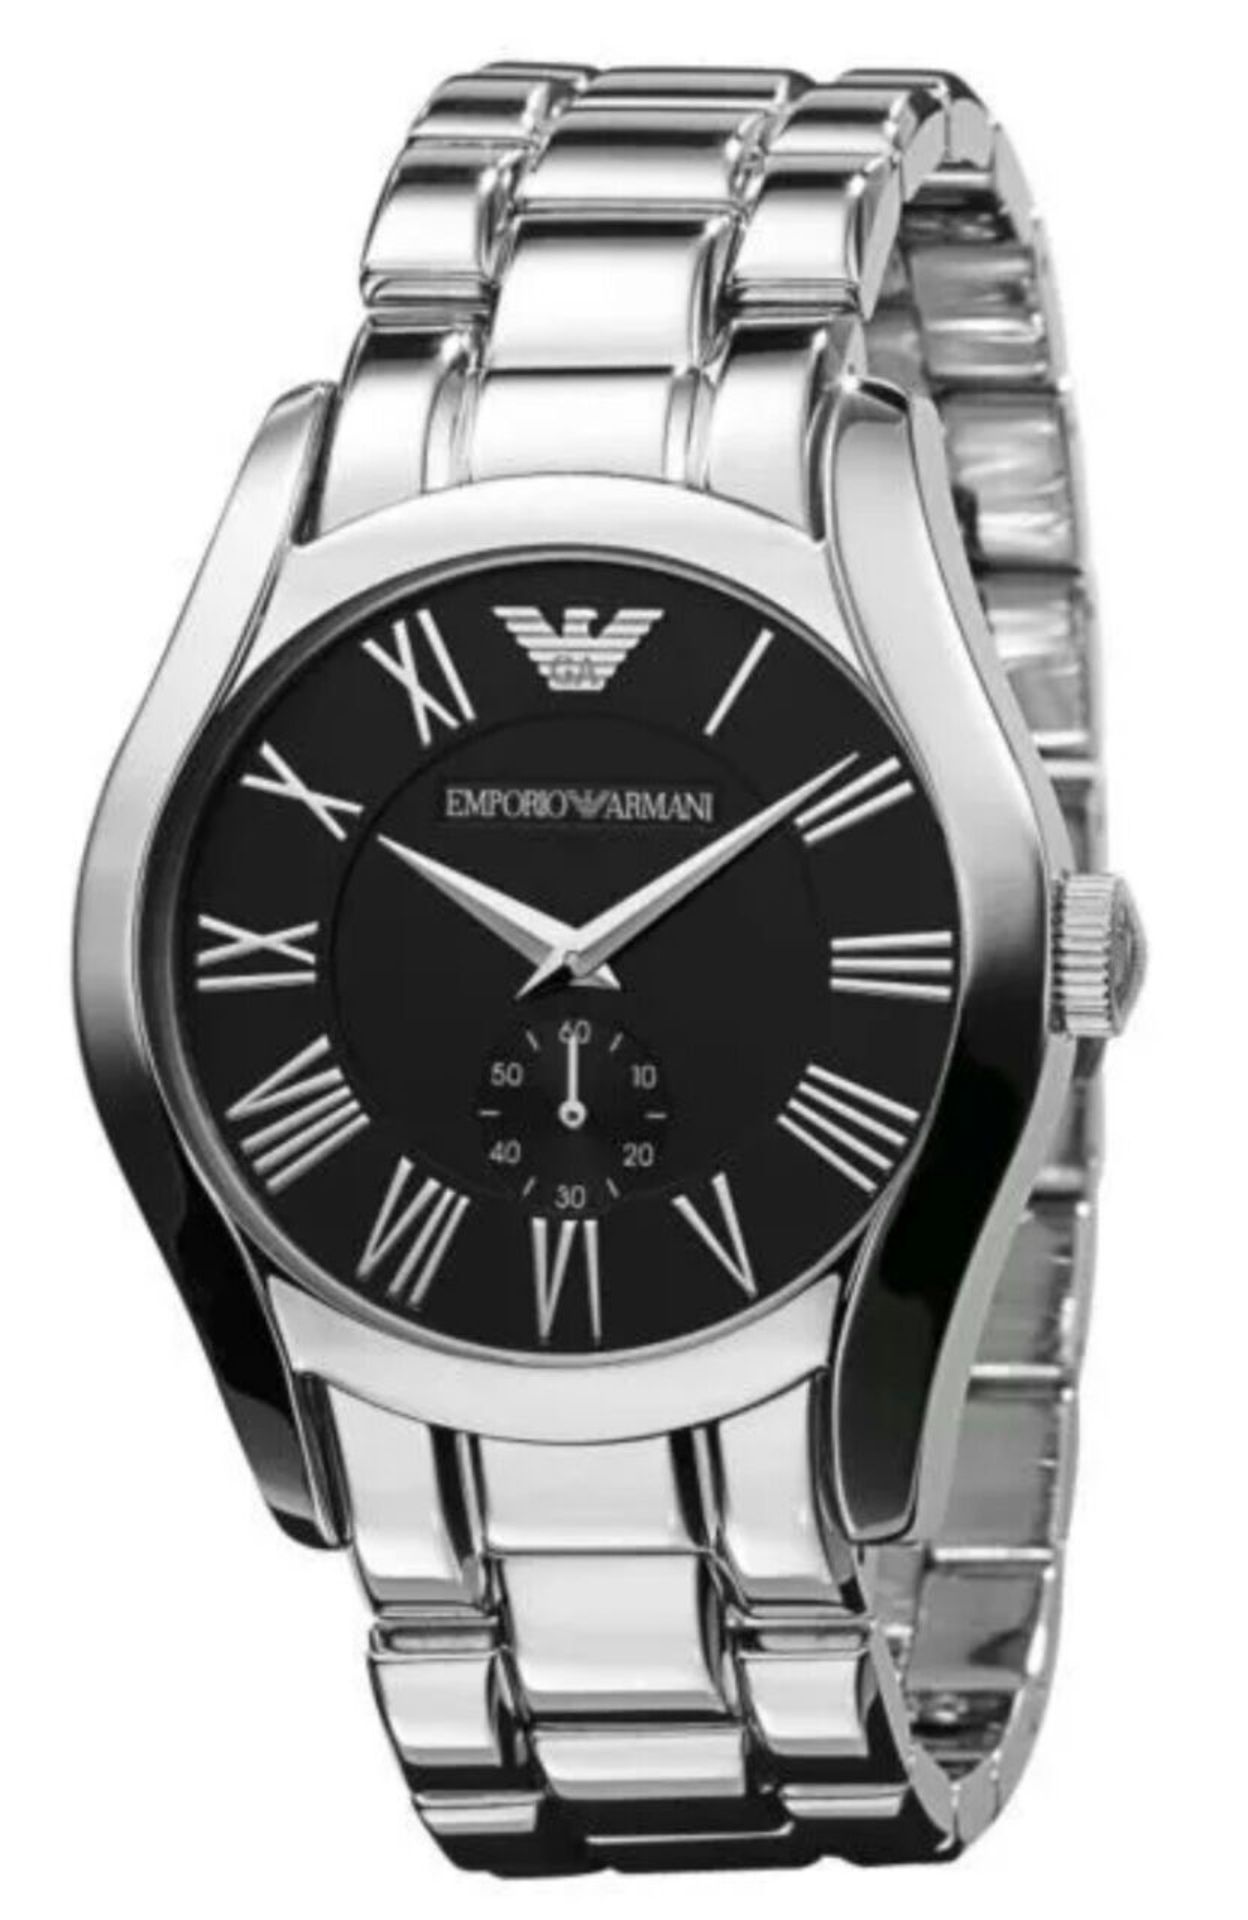 BRAND NEW EMPORIO ARMANI AR0680, GENTS POLISHED STAINLESS STEEL BRACELET WATCH, WITH A BLACK